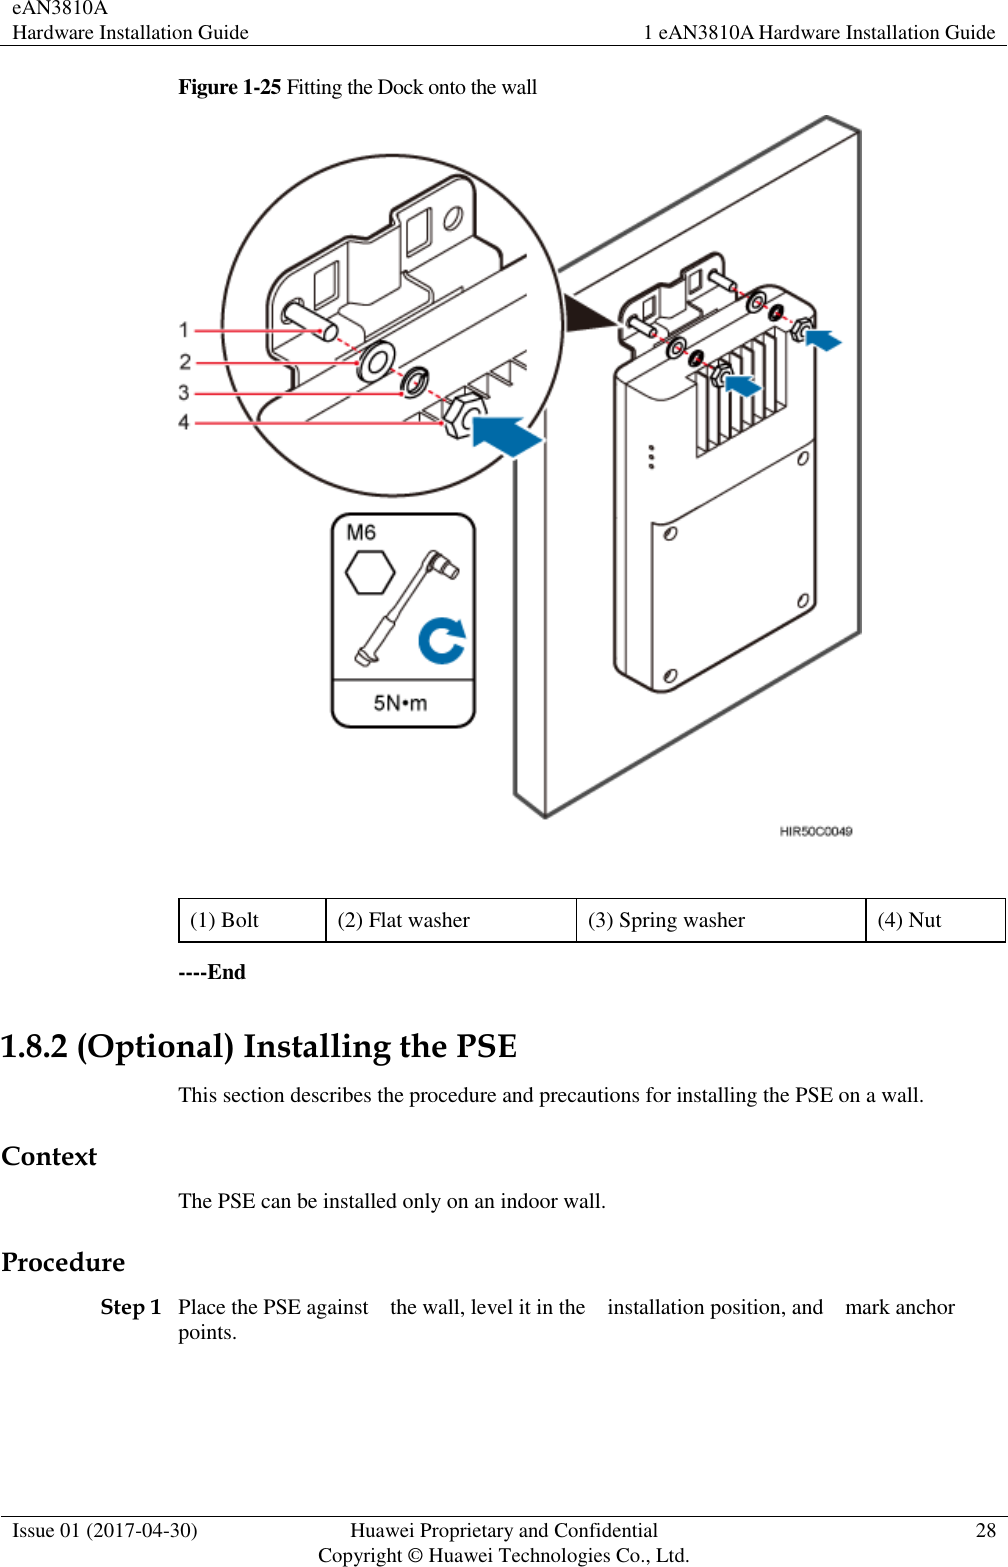 eAN3810A   Hardware Installation Guide 1 eAN3810A Hardware Installation Guide  Issue 01 (2017-04-30) Huawei Proprietary and Confidential                                     Copyright © Huawei Technologies Co., Ltd. 28  Figure 1-25 Fitting the Dock onto the wall   (1) Bolt (2) Flat washer (3) Spring washer (4) Nut ----End 1.8.2 (Optional) Installing the PSE This section describes the procedure and precautions for installing the PSE on a wall. Context The PSE can be installed only on an indoor wall. Procedure Step 1 Place the PSE against    the wall, level it in the    installation position, and    mark anchor points. 